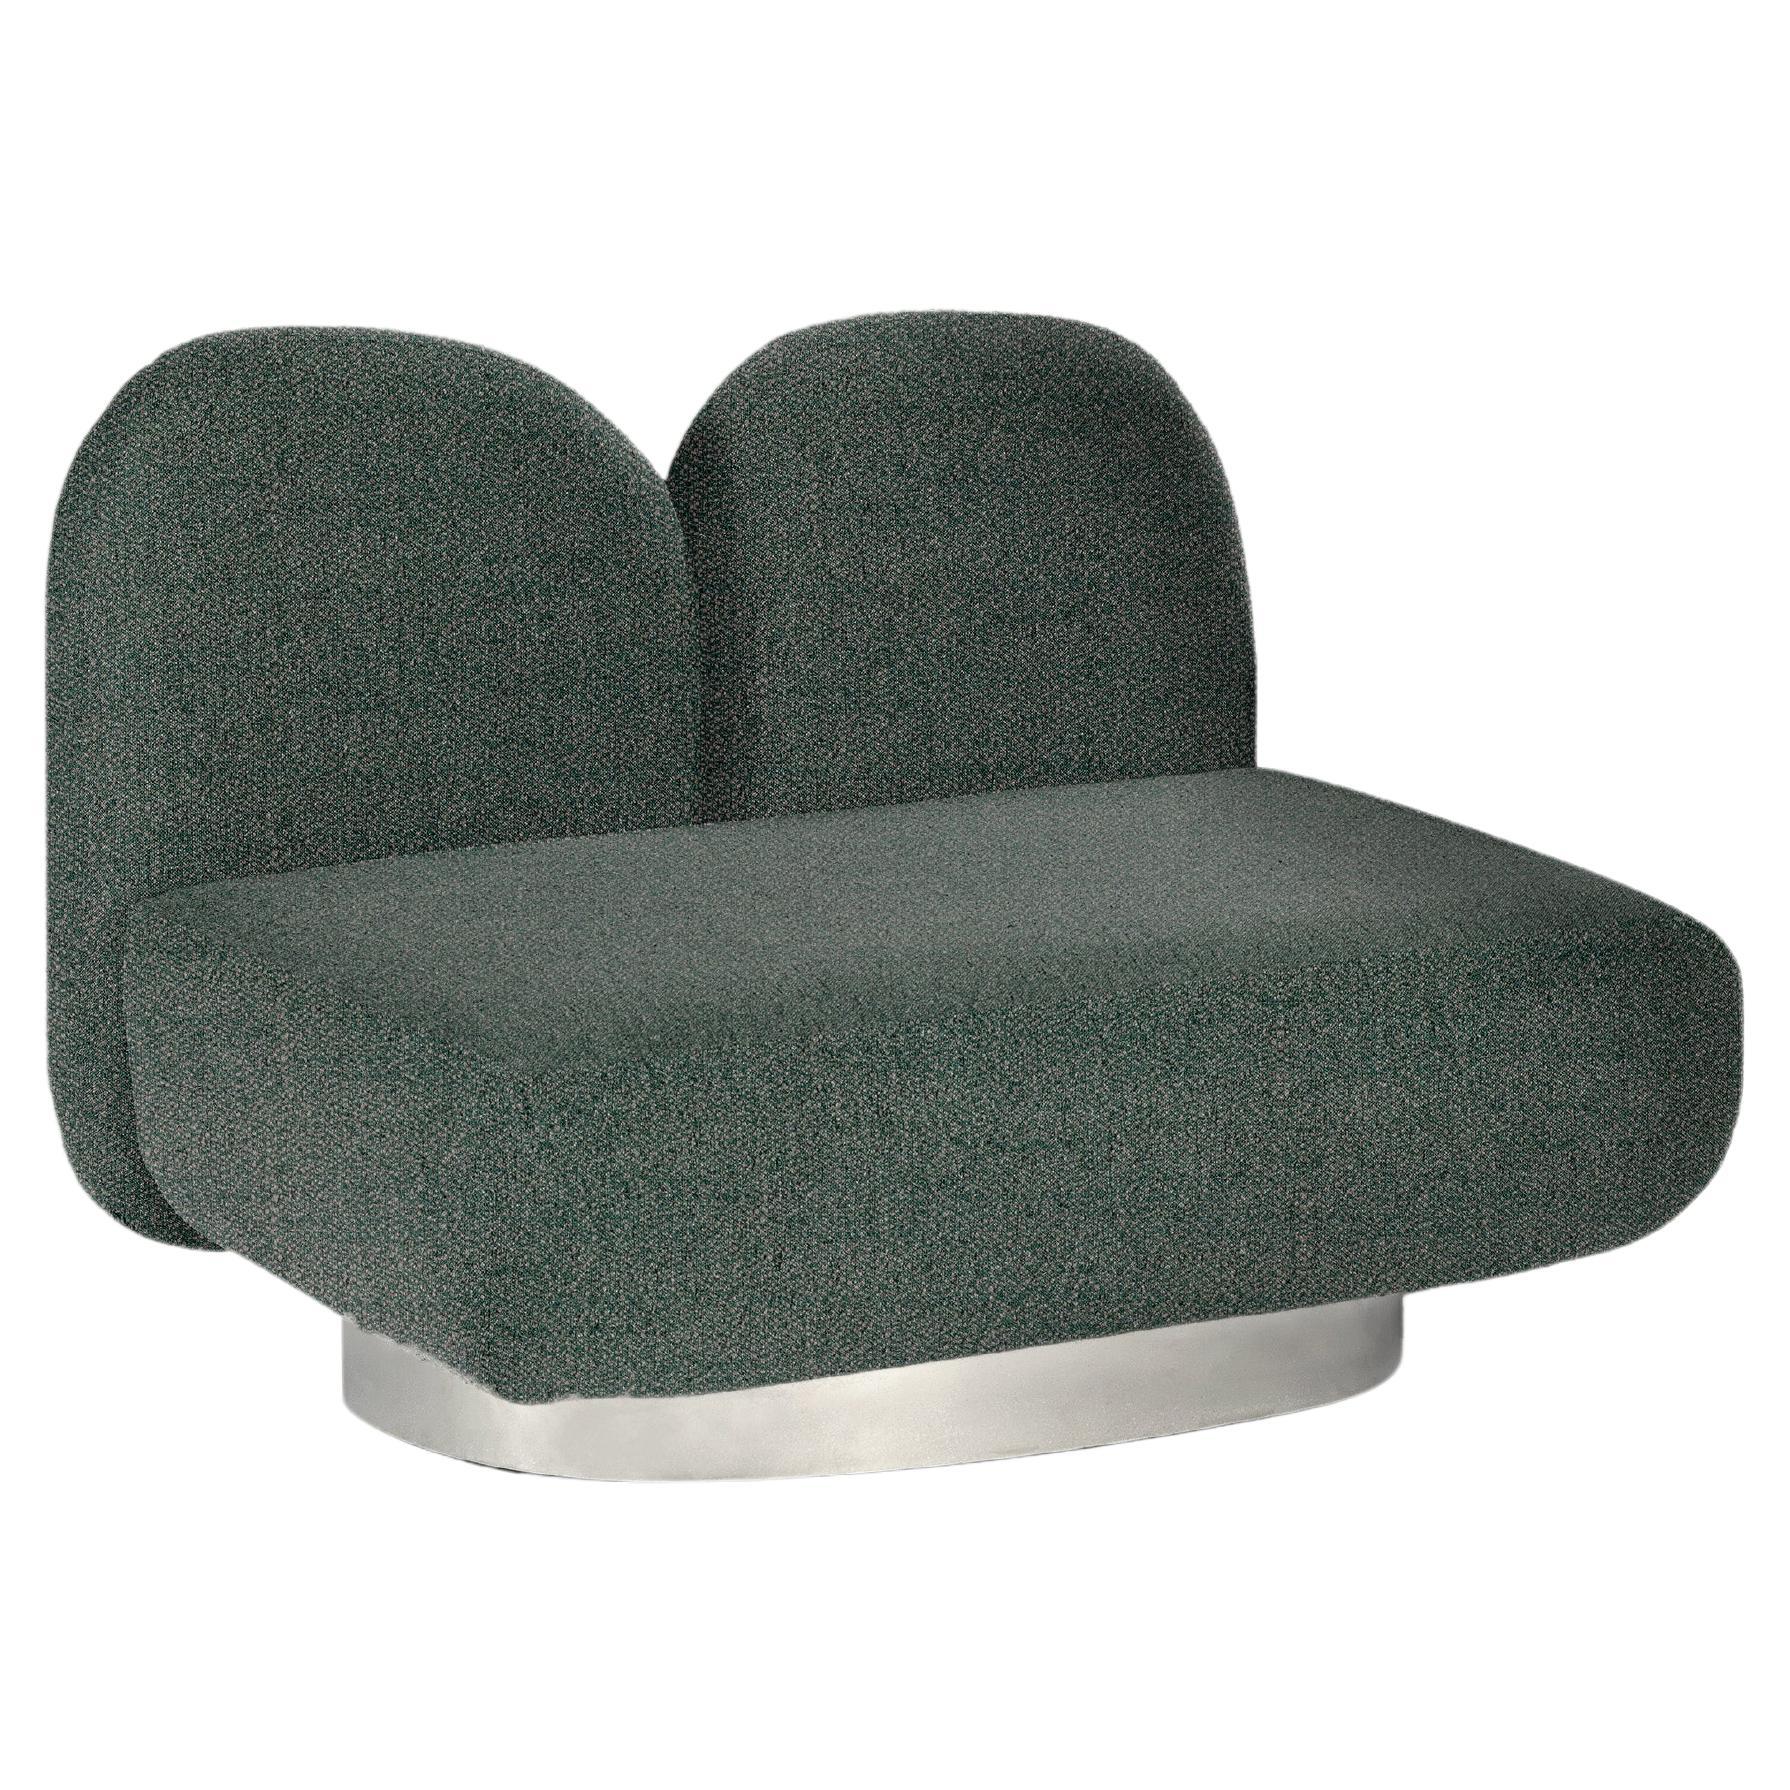 Contemporary Sofa 'Assemble' by Destroyers/Builders, 1 seater